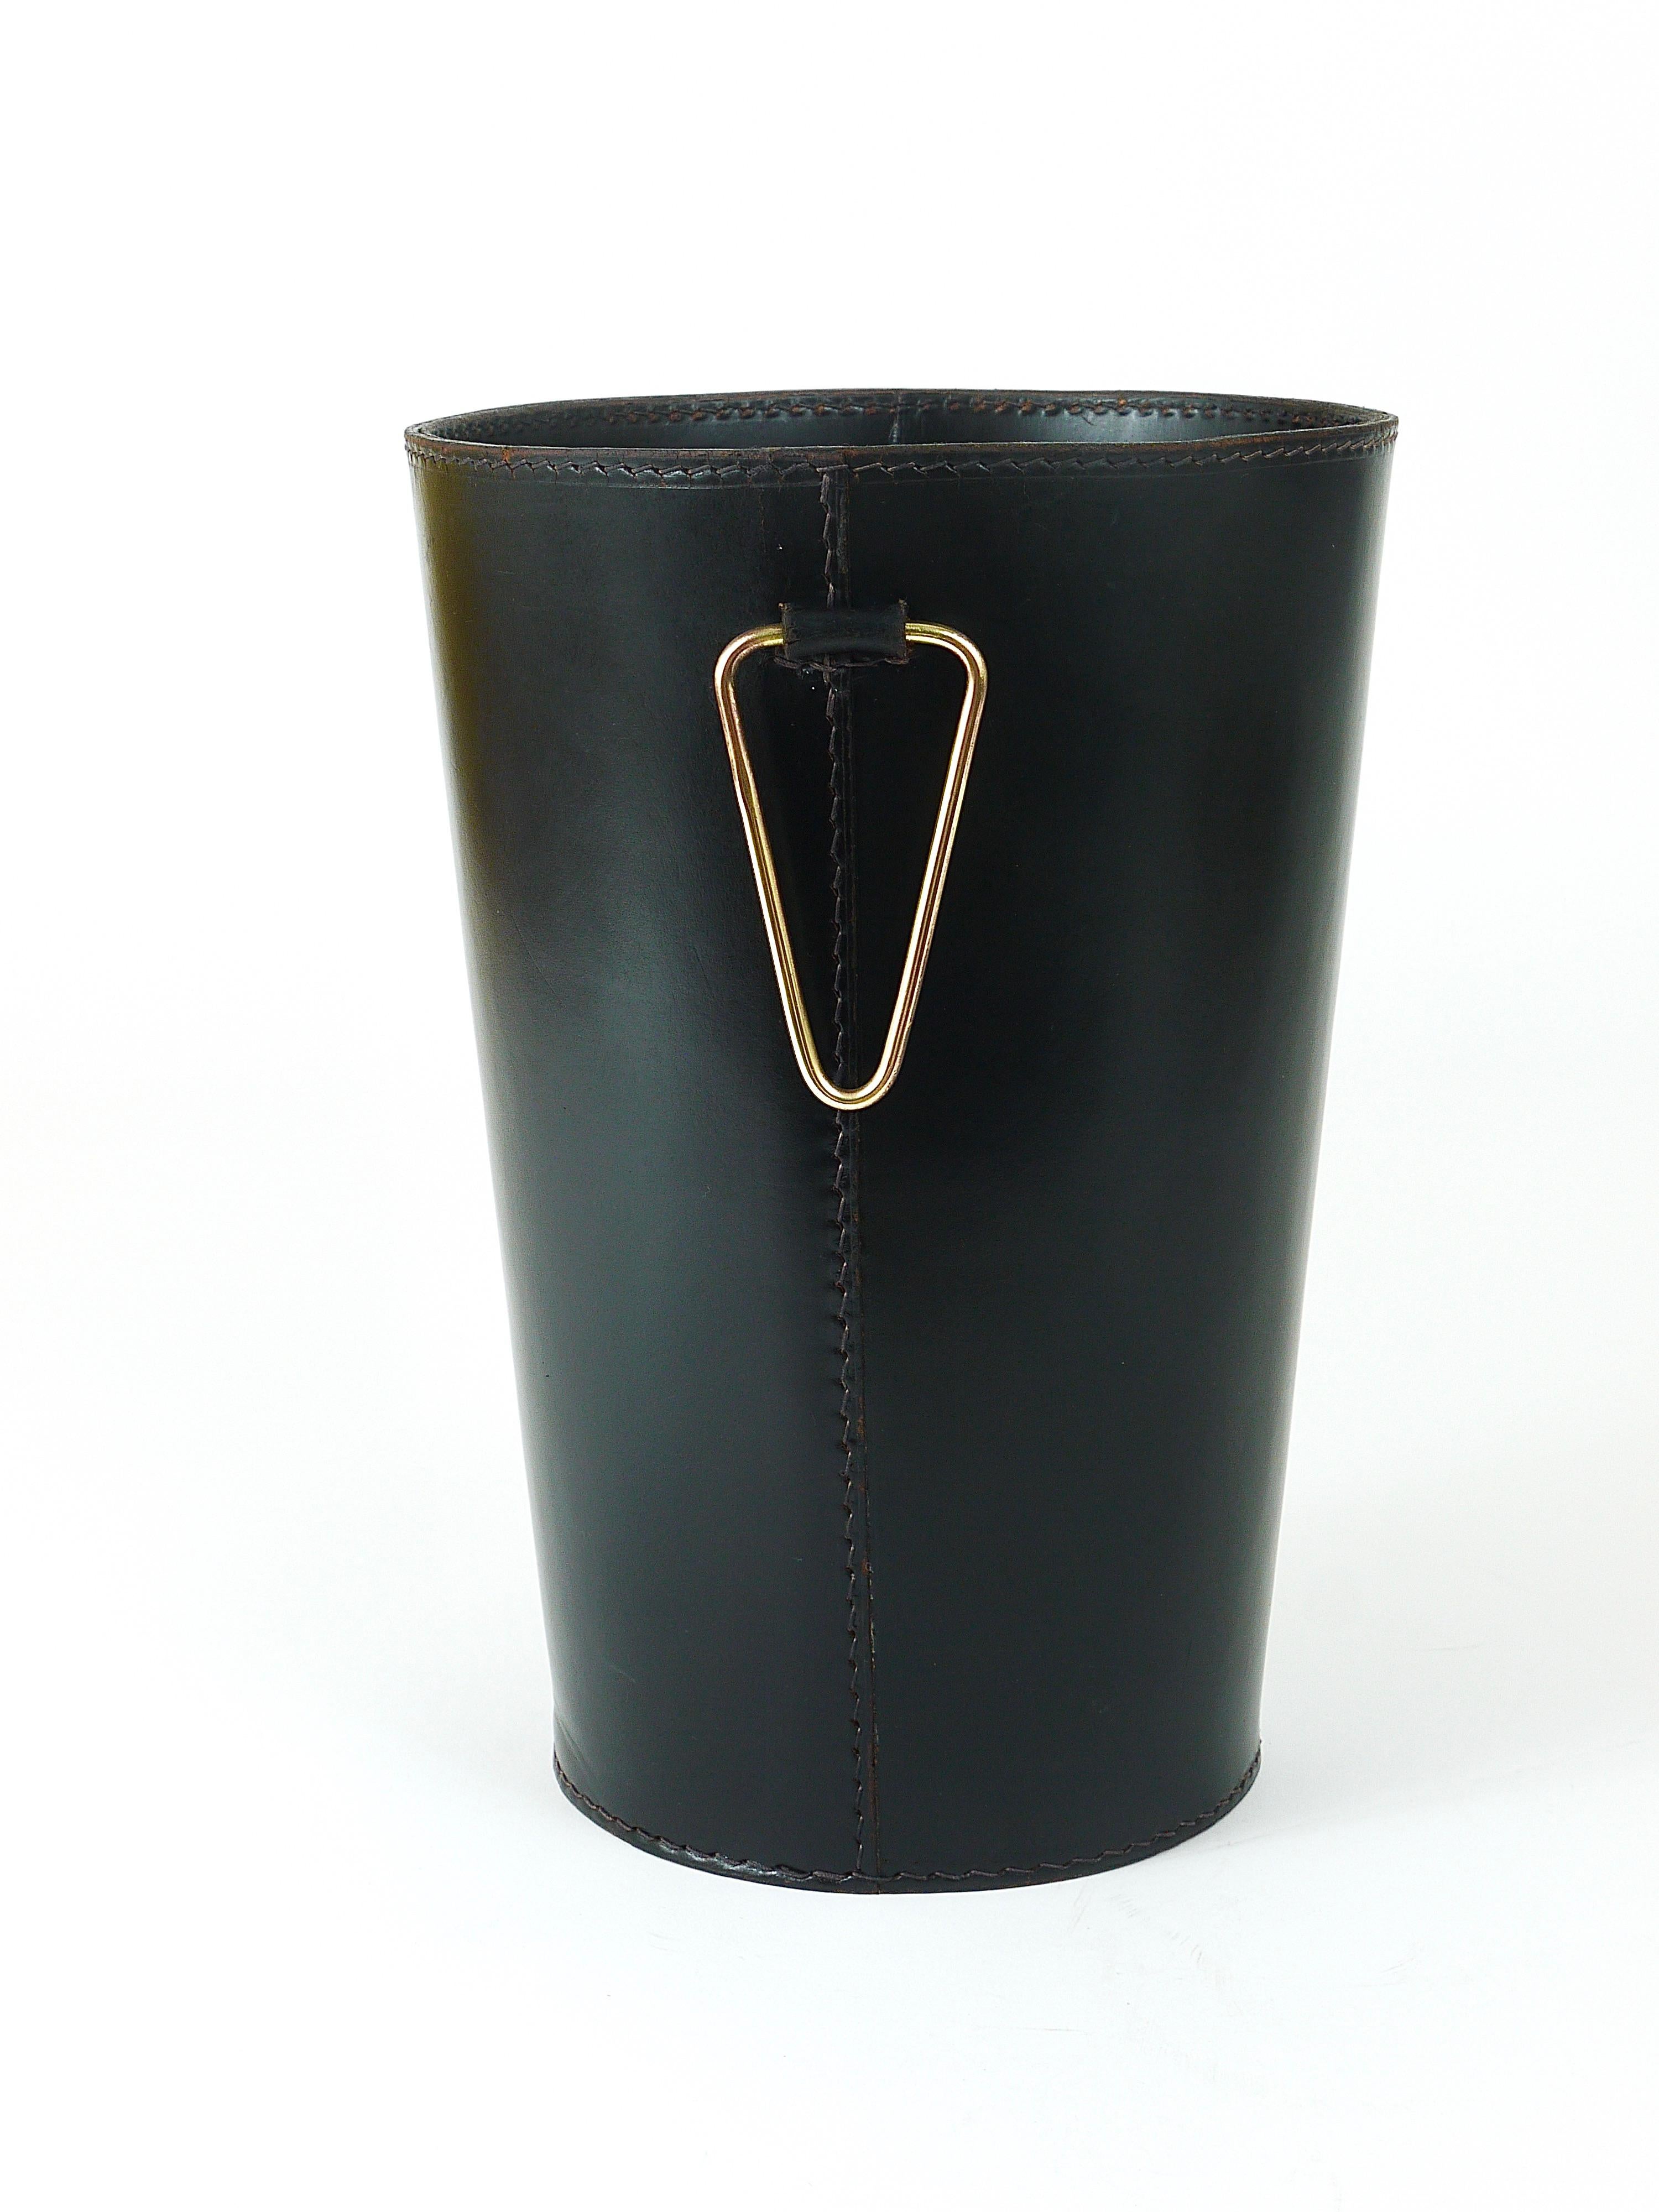 A beautiful and elegant, vintage Mid-Century Modern paper basket / paper bin from the 1950s. Designed an executed by Werkstätte Carl Aubock, Vienna / Austria. Handmade and hand-sewn from thick black leather, decorated by a polished brass handle. 